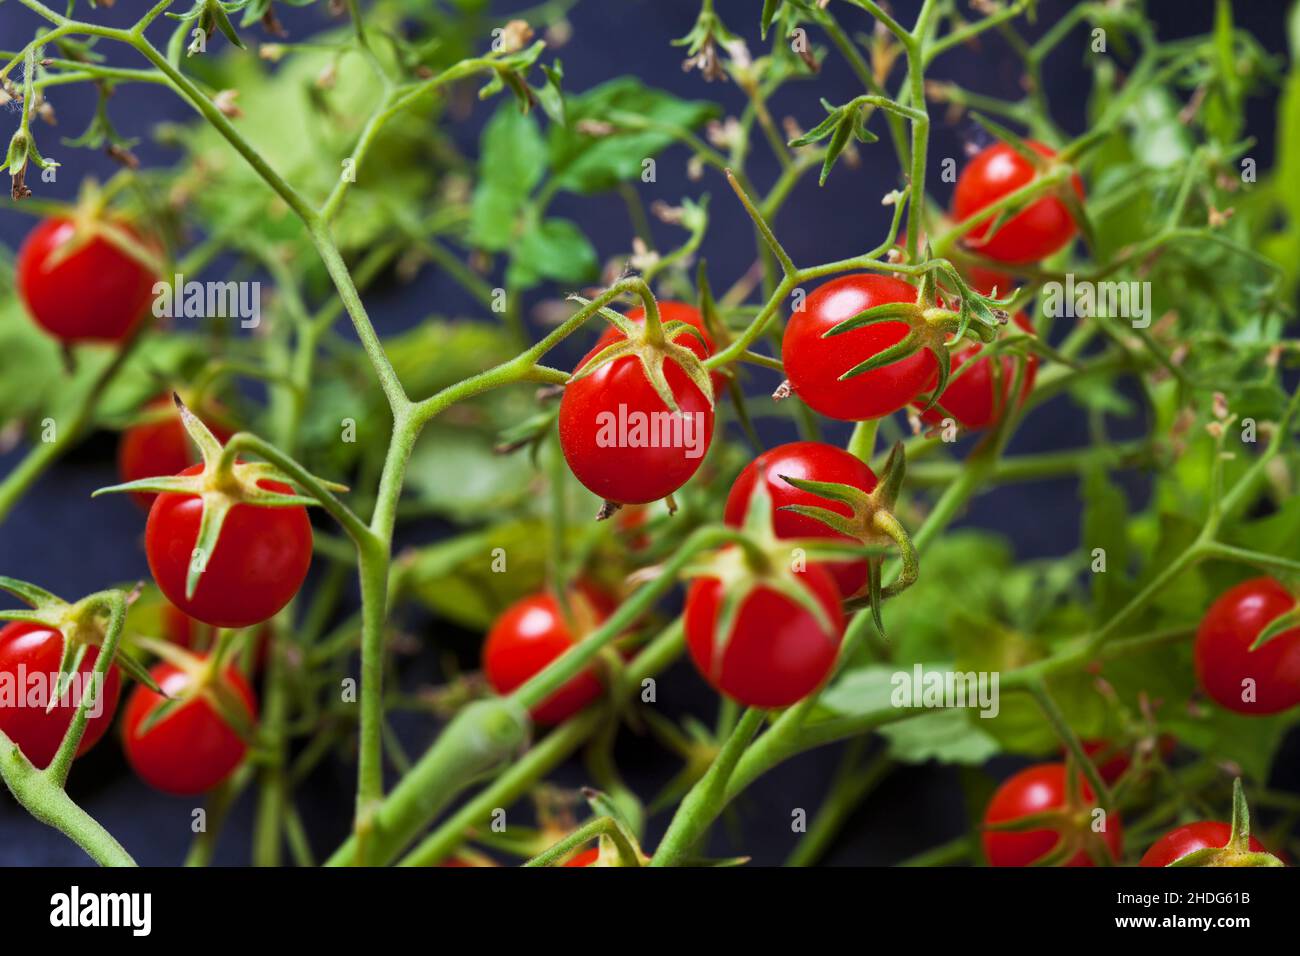 currant tomatoes Stock Photo